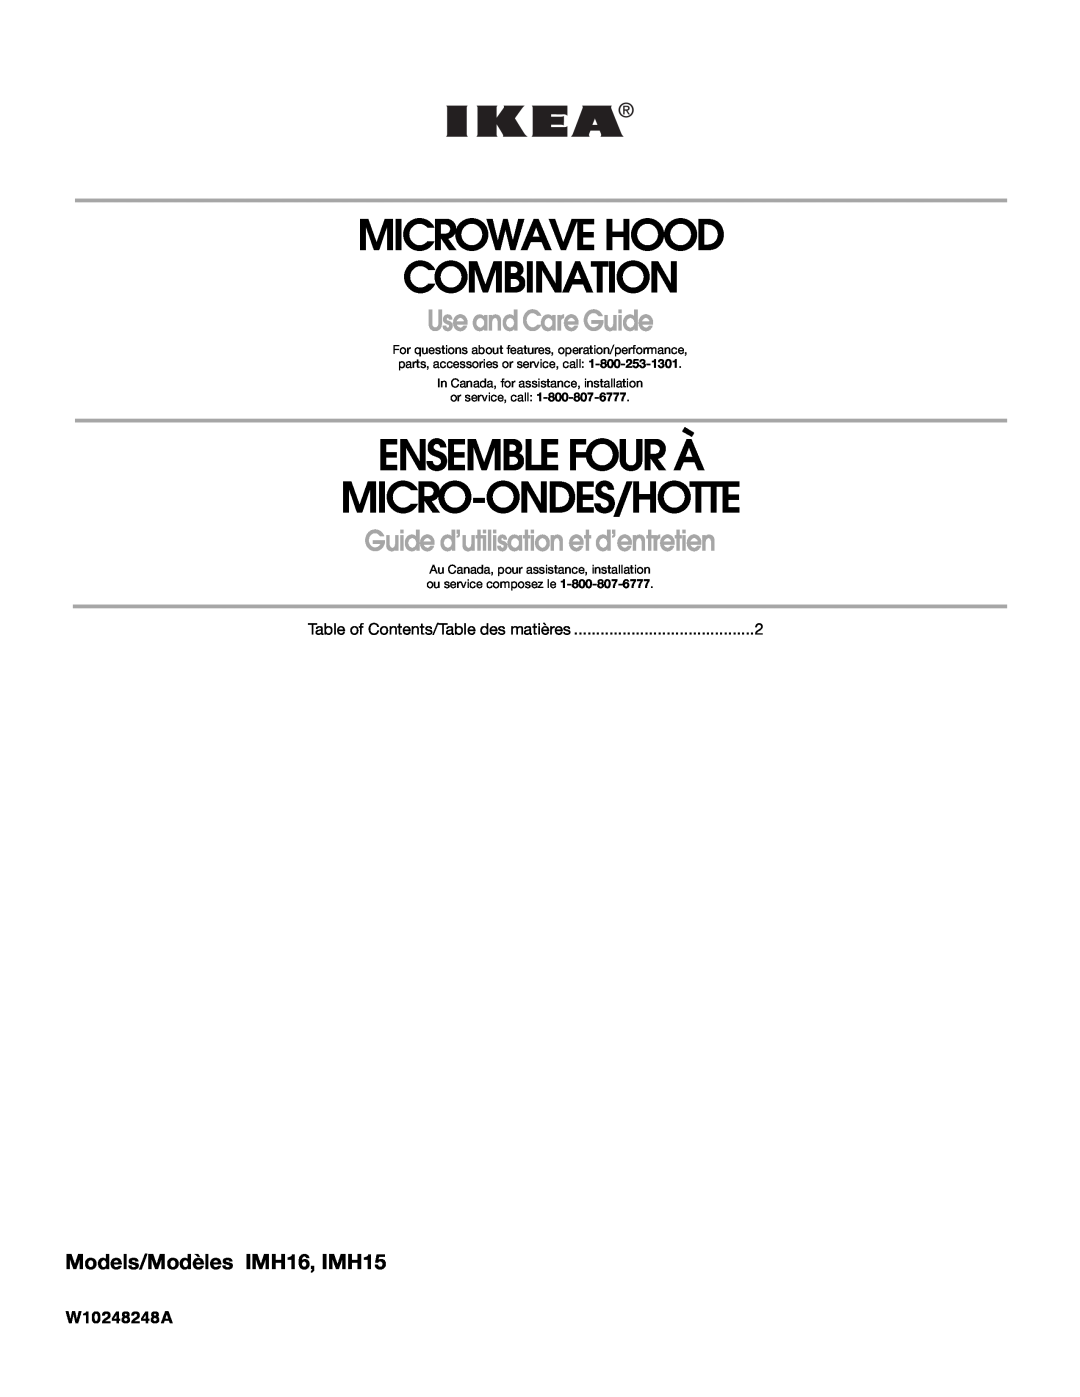 IKEA IMH15, IMH16 manual W10248248A, Microwave Hood Combination, Ensemble Four À Micro-Ondes/Hotte, Use and Care Guide 